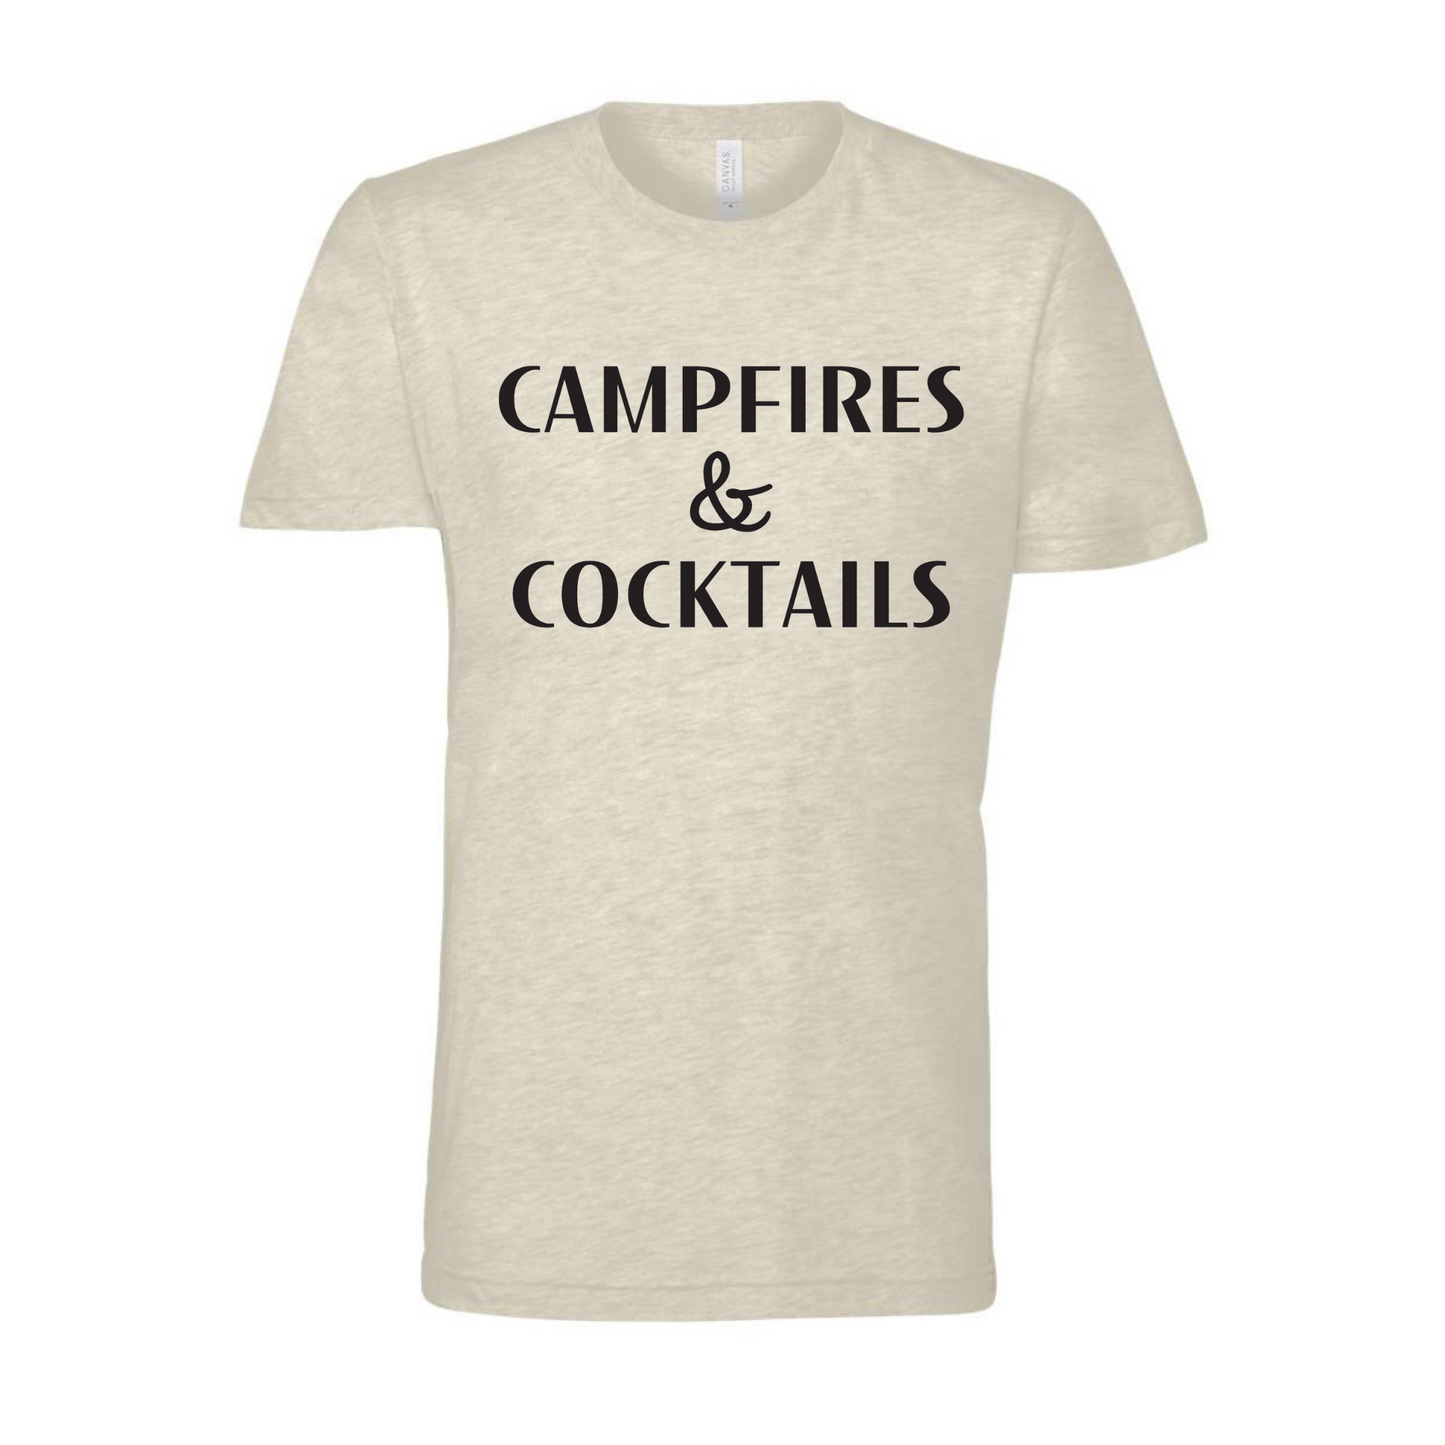 Campfires & Cocktails - T-Shirt in Heather oatmeal. The front of the shirt has a black bold font with campfires & cocktails on it. This is the front view of the shirt.